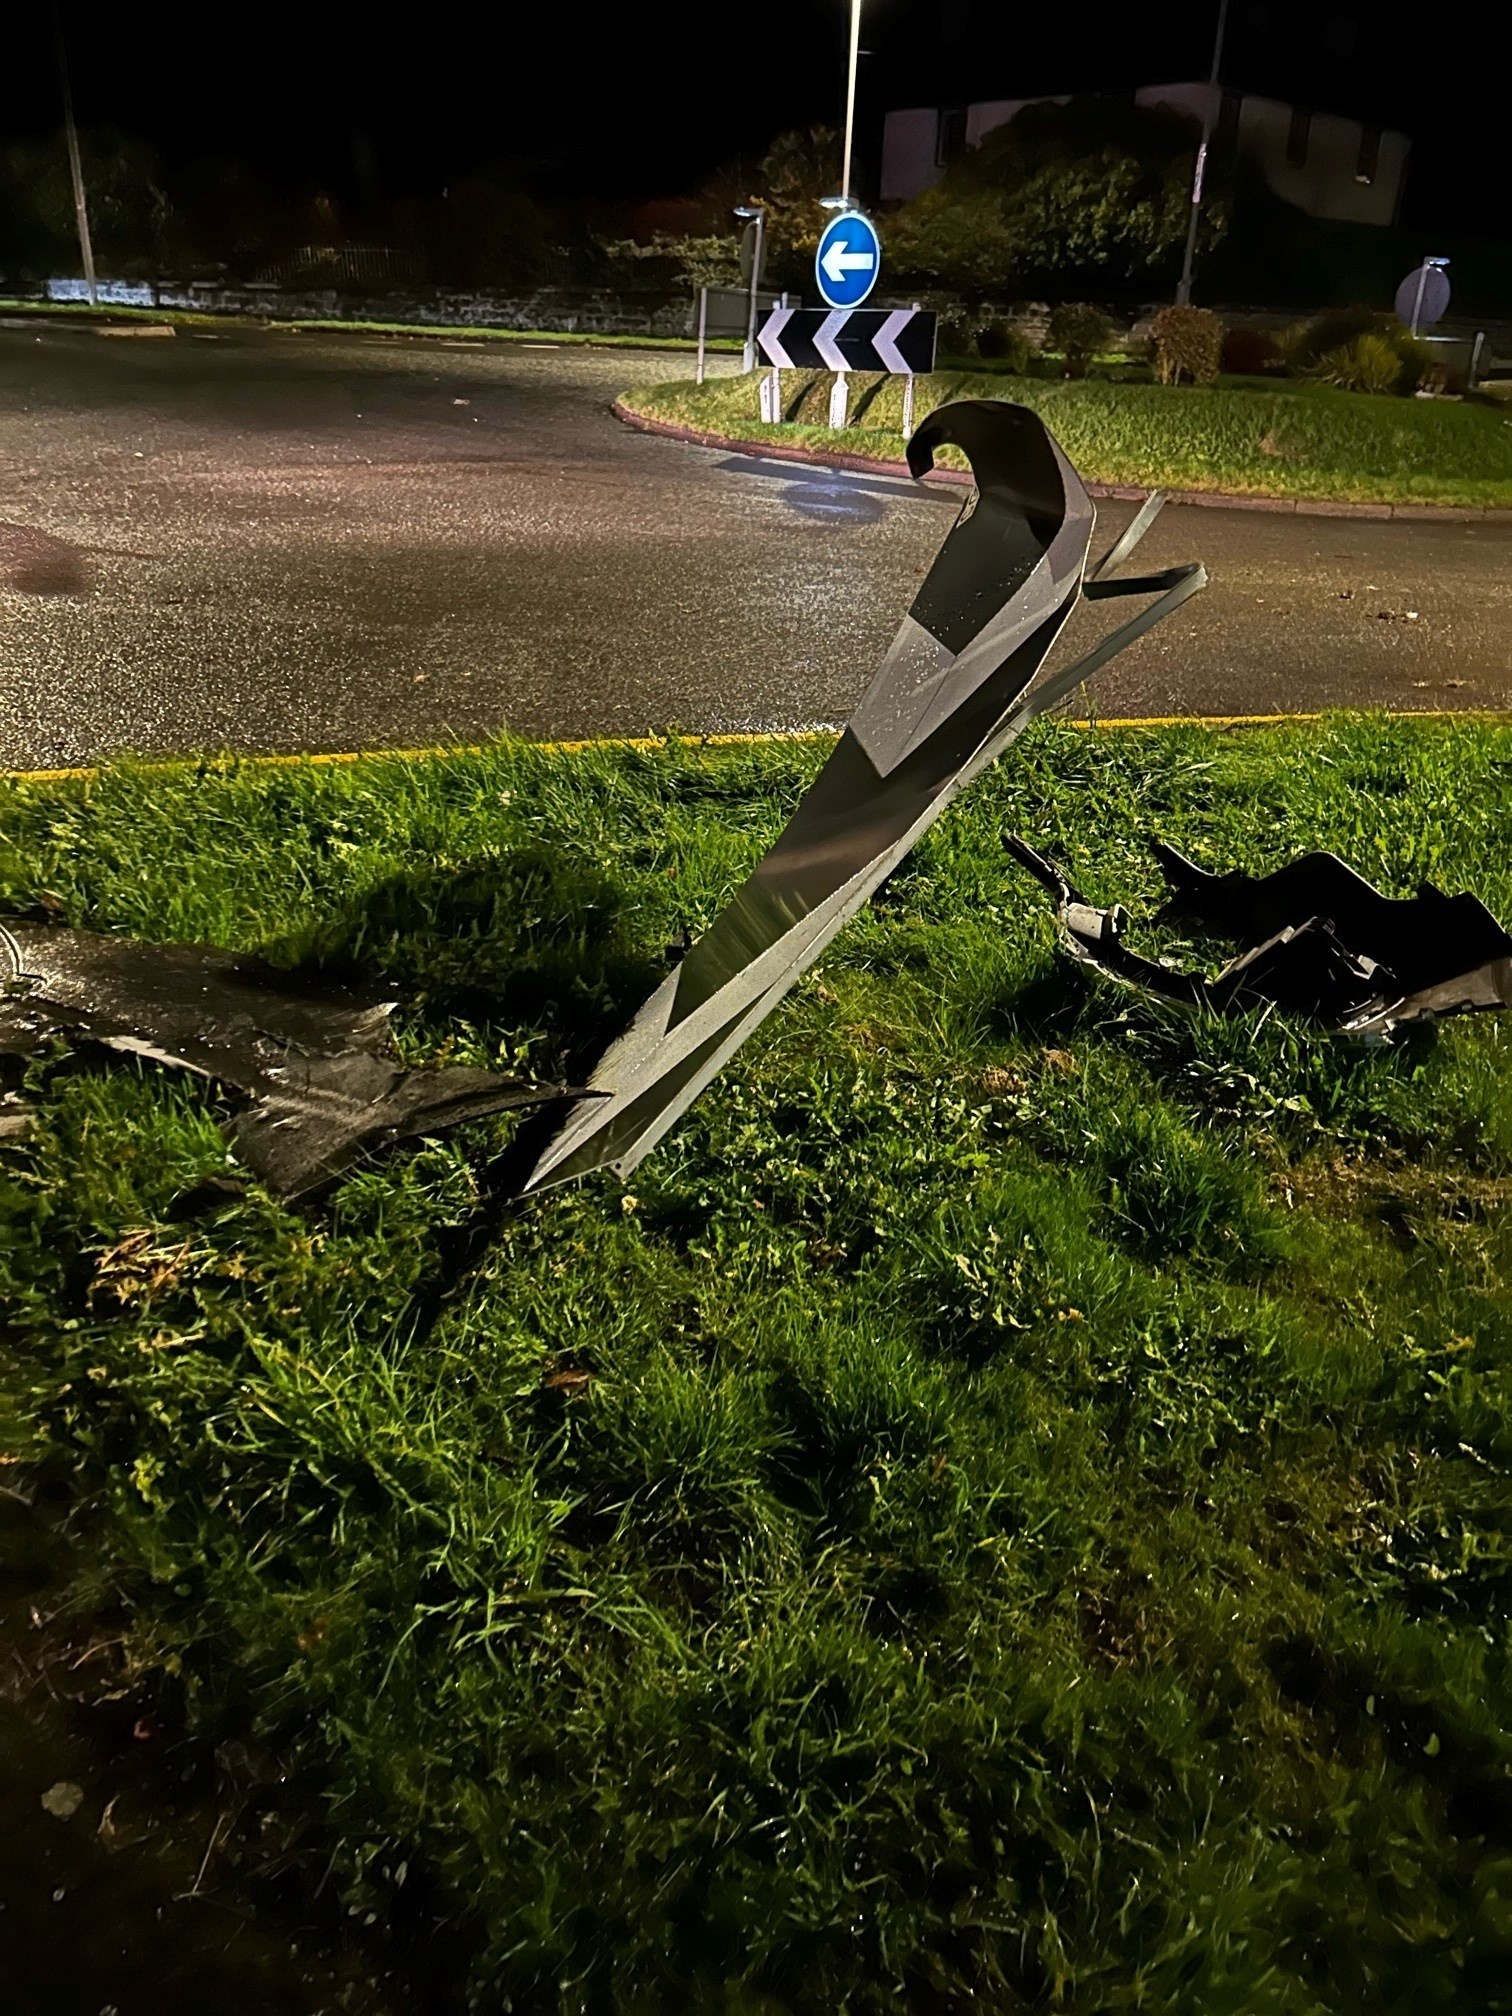 Parts of the Audi were found strewn near the Crossgates roundabout after the car collided with a sign with three deflating tyres before crashing into a hedge. Picture by Powys Roads Policing/Dyfed-Powys Police